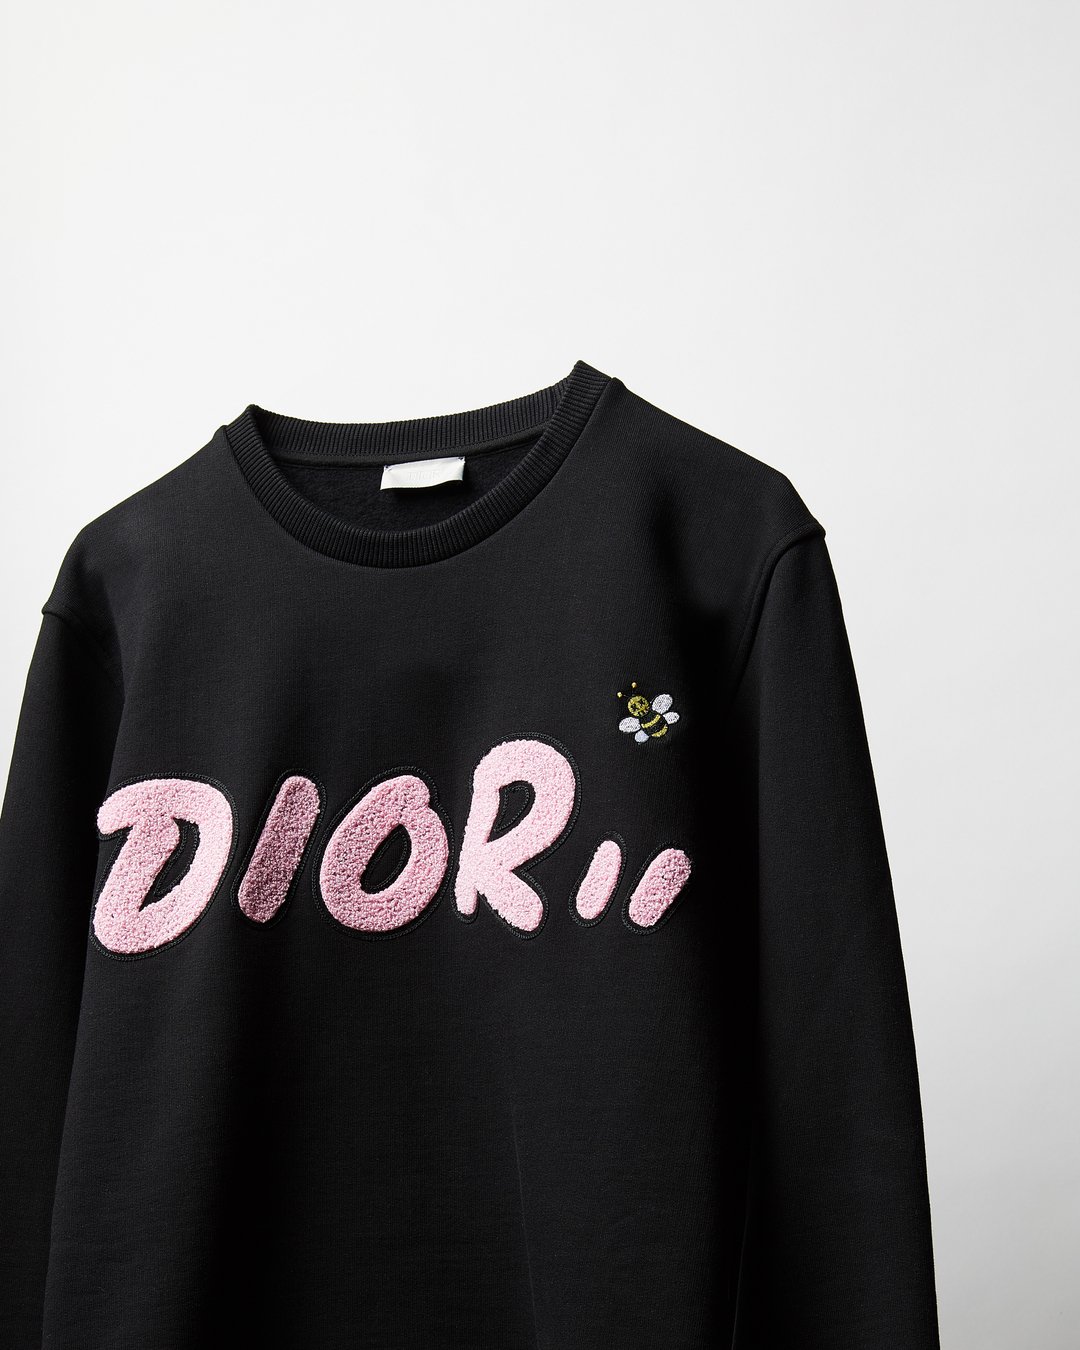 end clothing dior